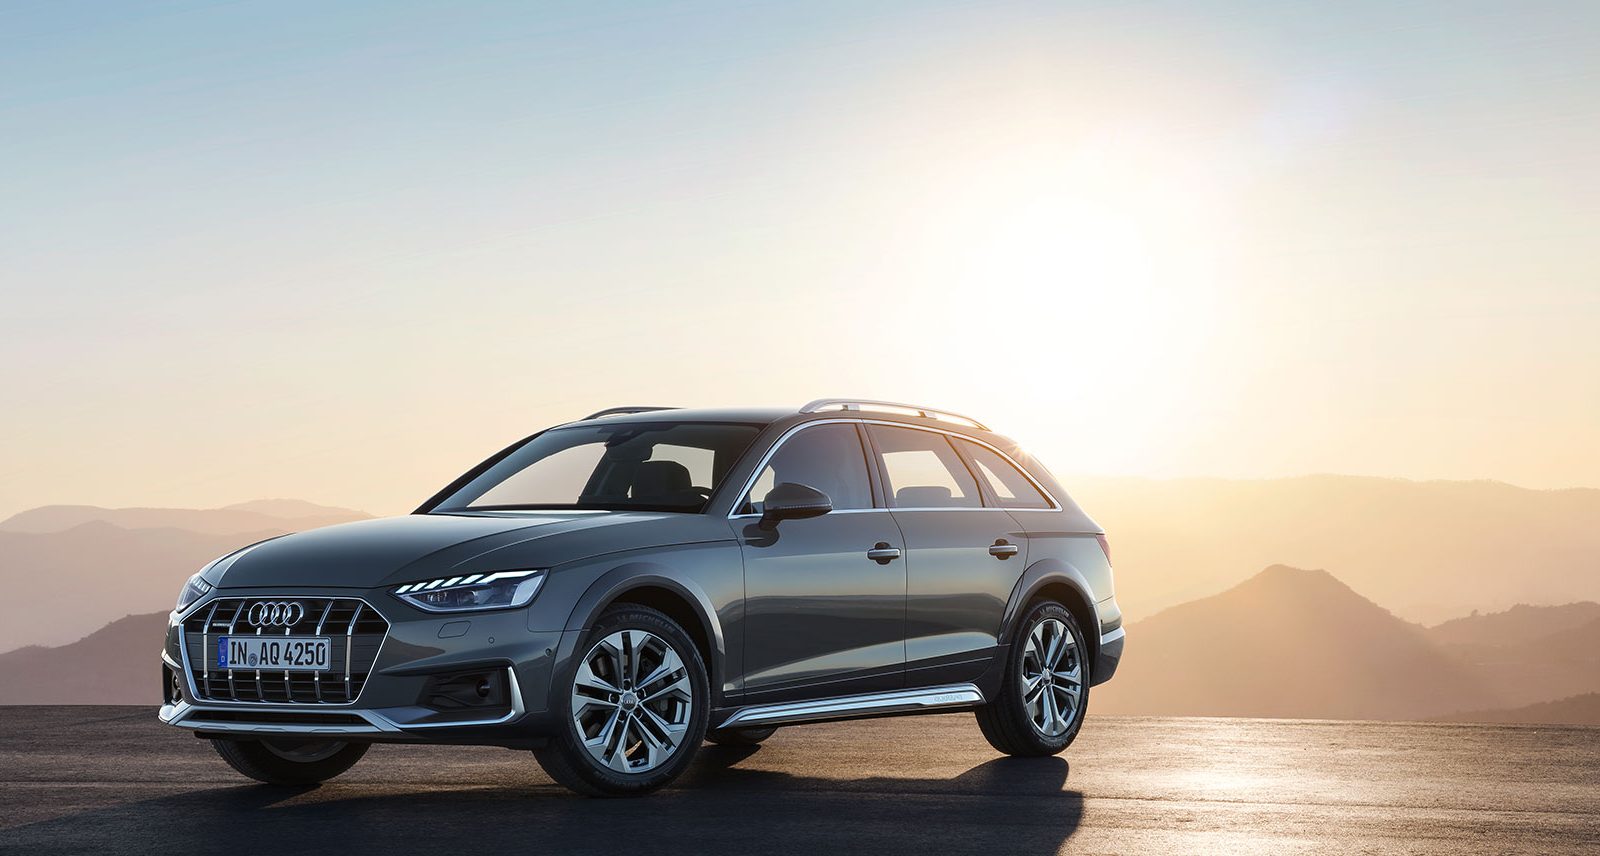 The New Audi A4 Allroad Is the Station Wagon We've All Been Dreaming Of